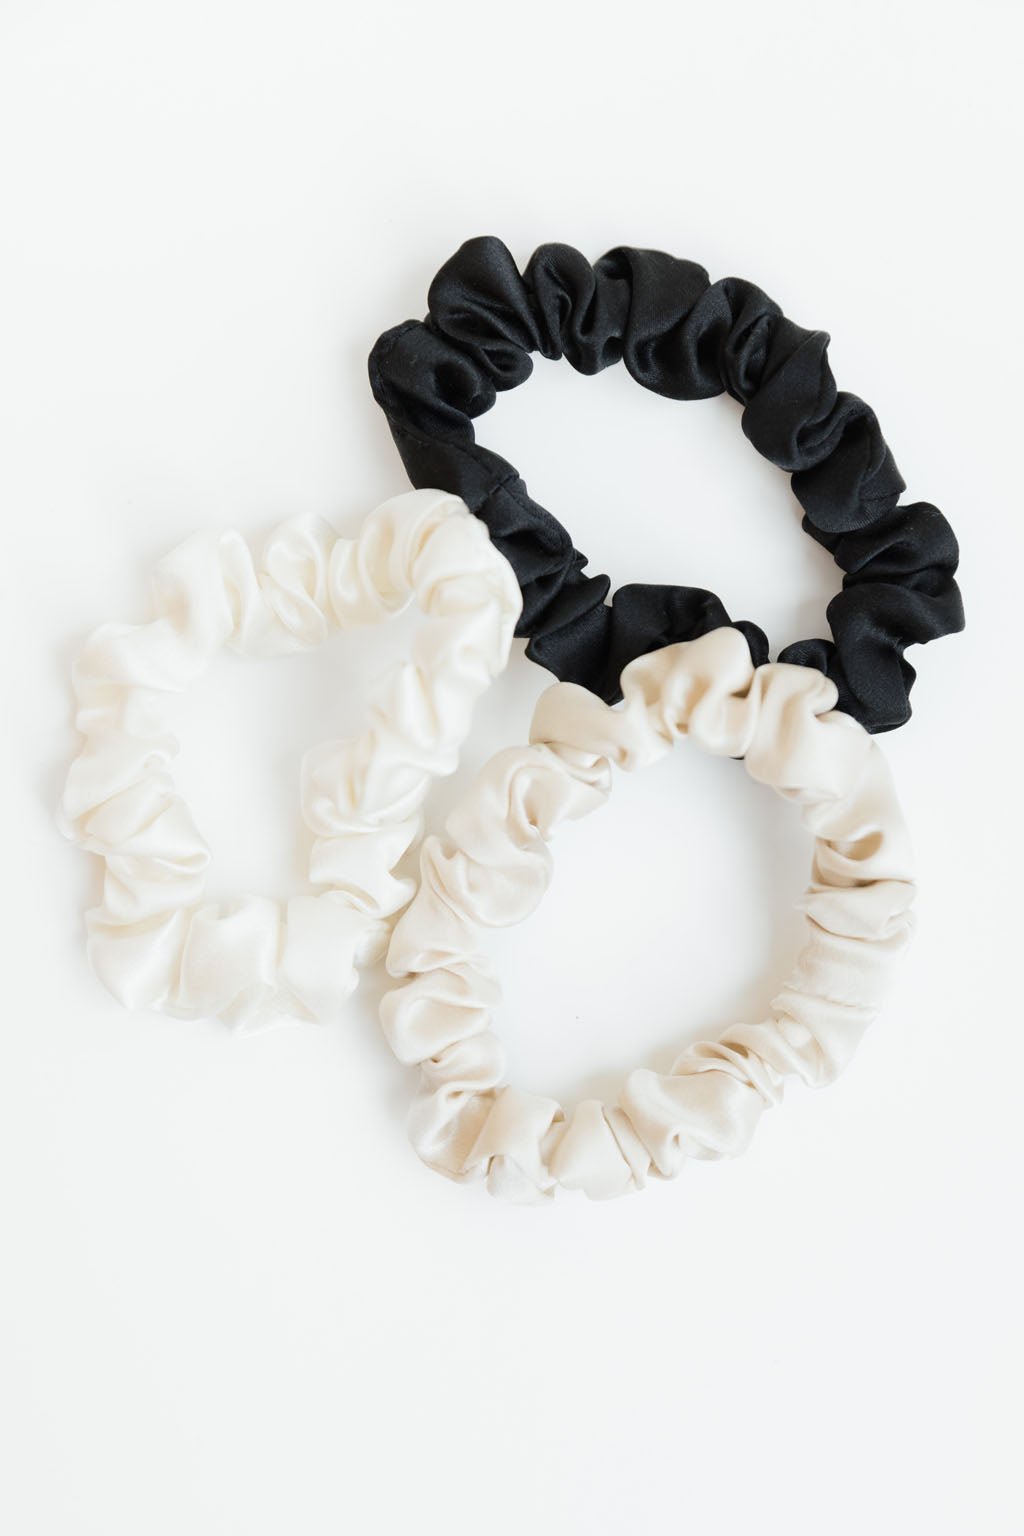 Three Silk Skinny Scrunchies from Cozy Earth are placed on a white background. Two of the scrunchies are cream-colored, and one is black. All of them have a ruffled texture. The scrunchies are arranged in such a way that they overlap slightly, forming a loose triangle.